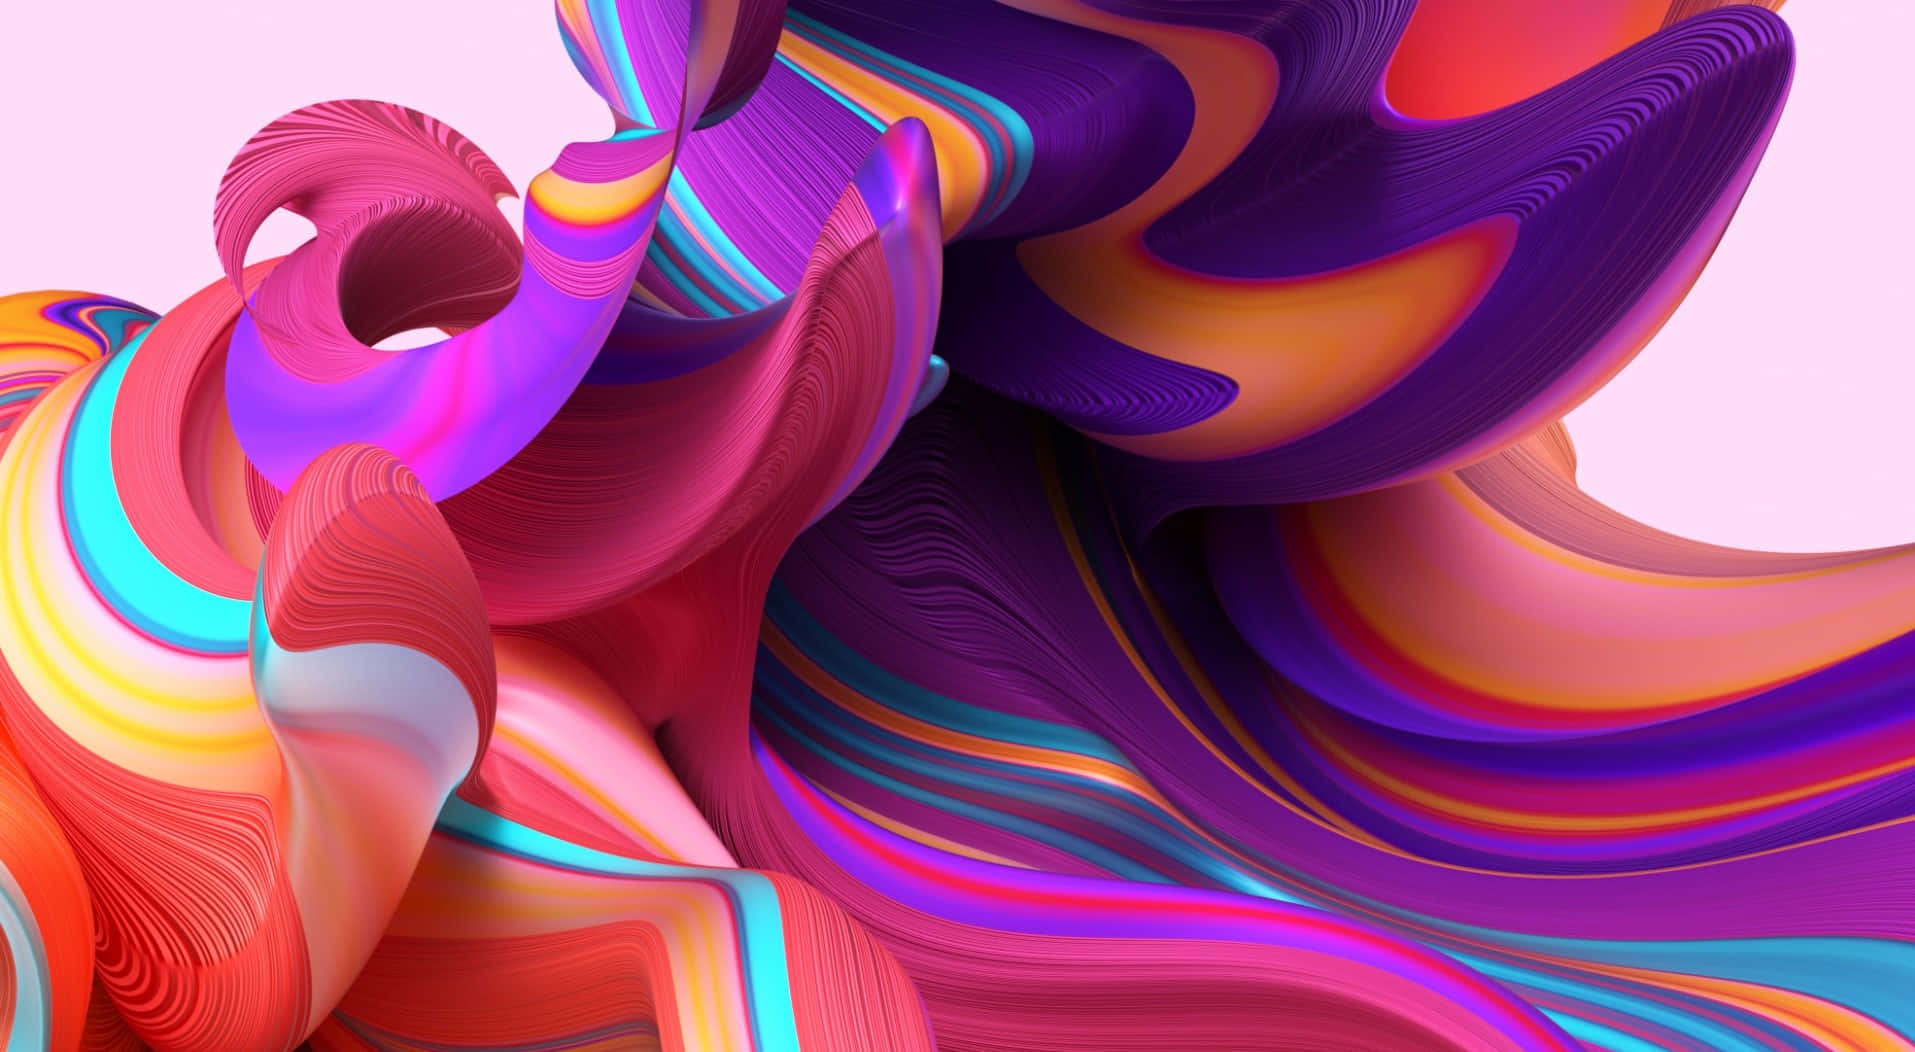 a colorful abstract art piece with swirls